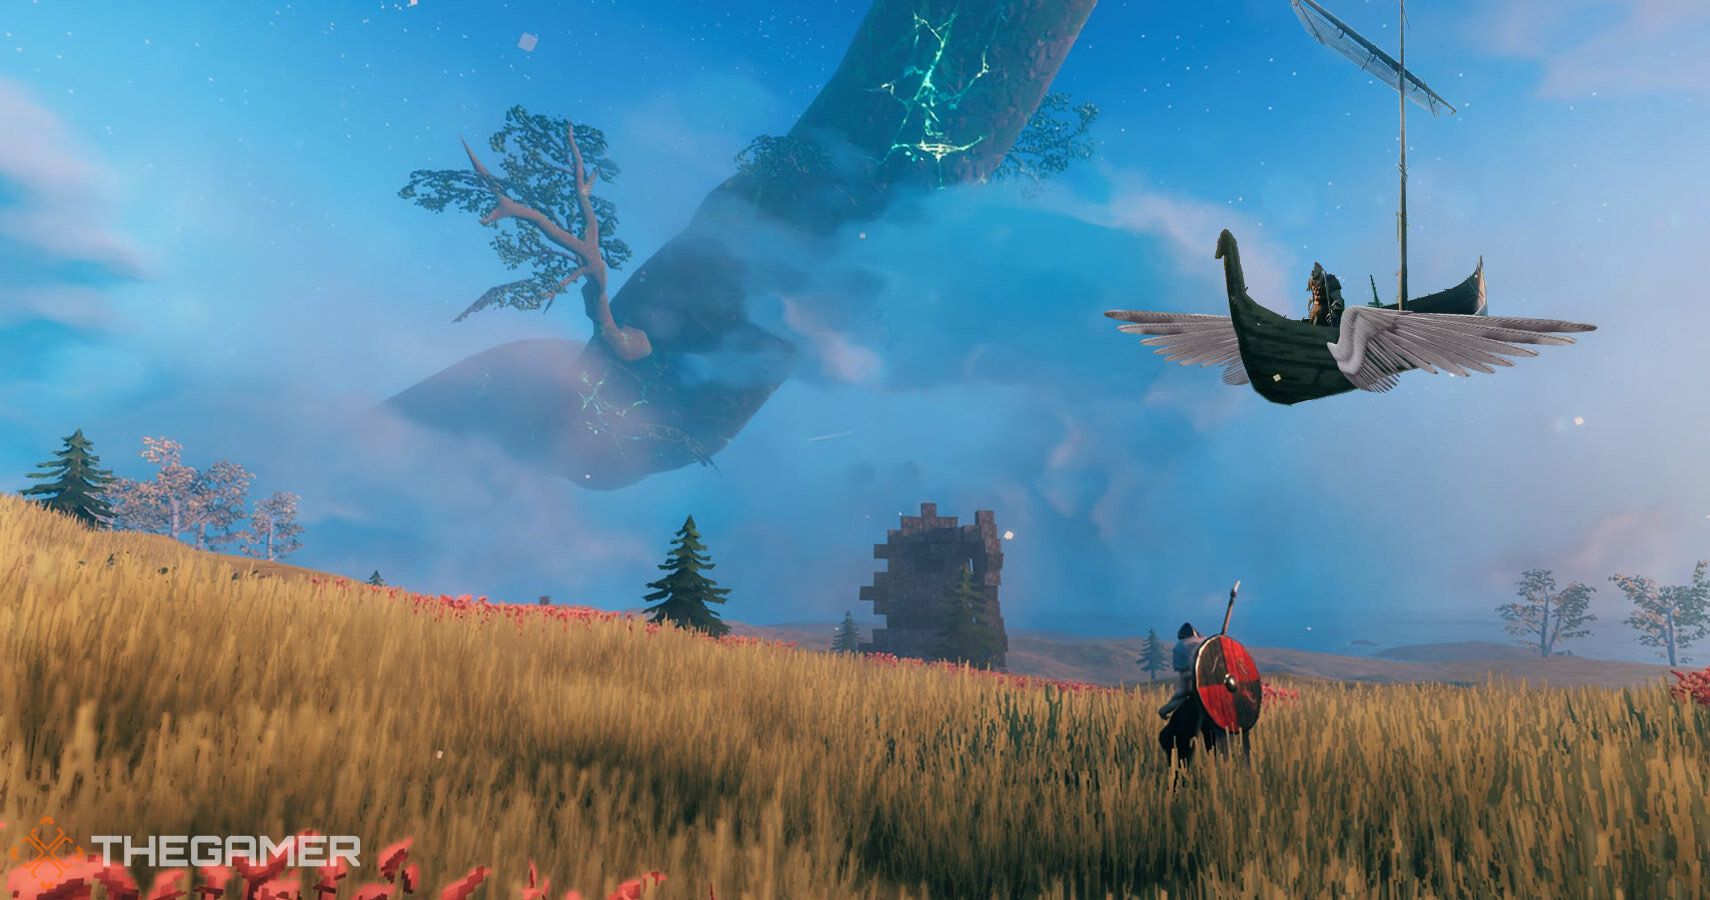 Actually, Birds Are Turning Into Flying Boats In Hilarious Valheim Glitch